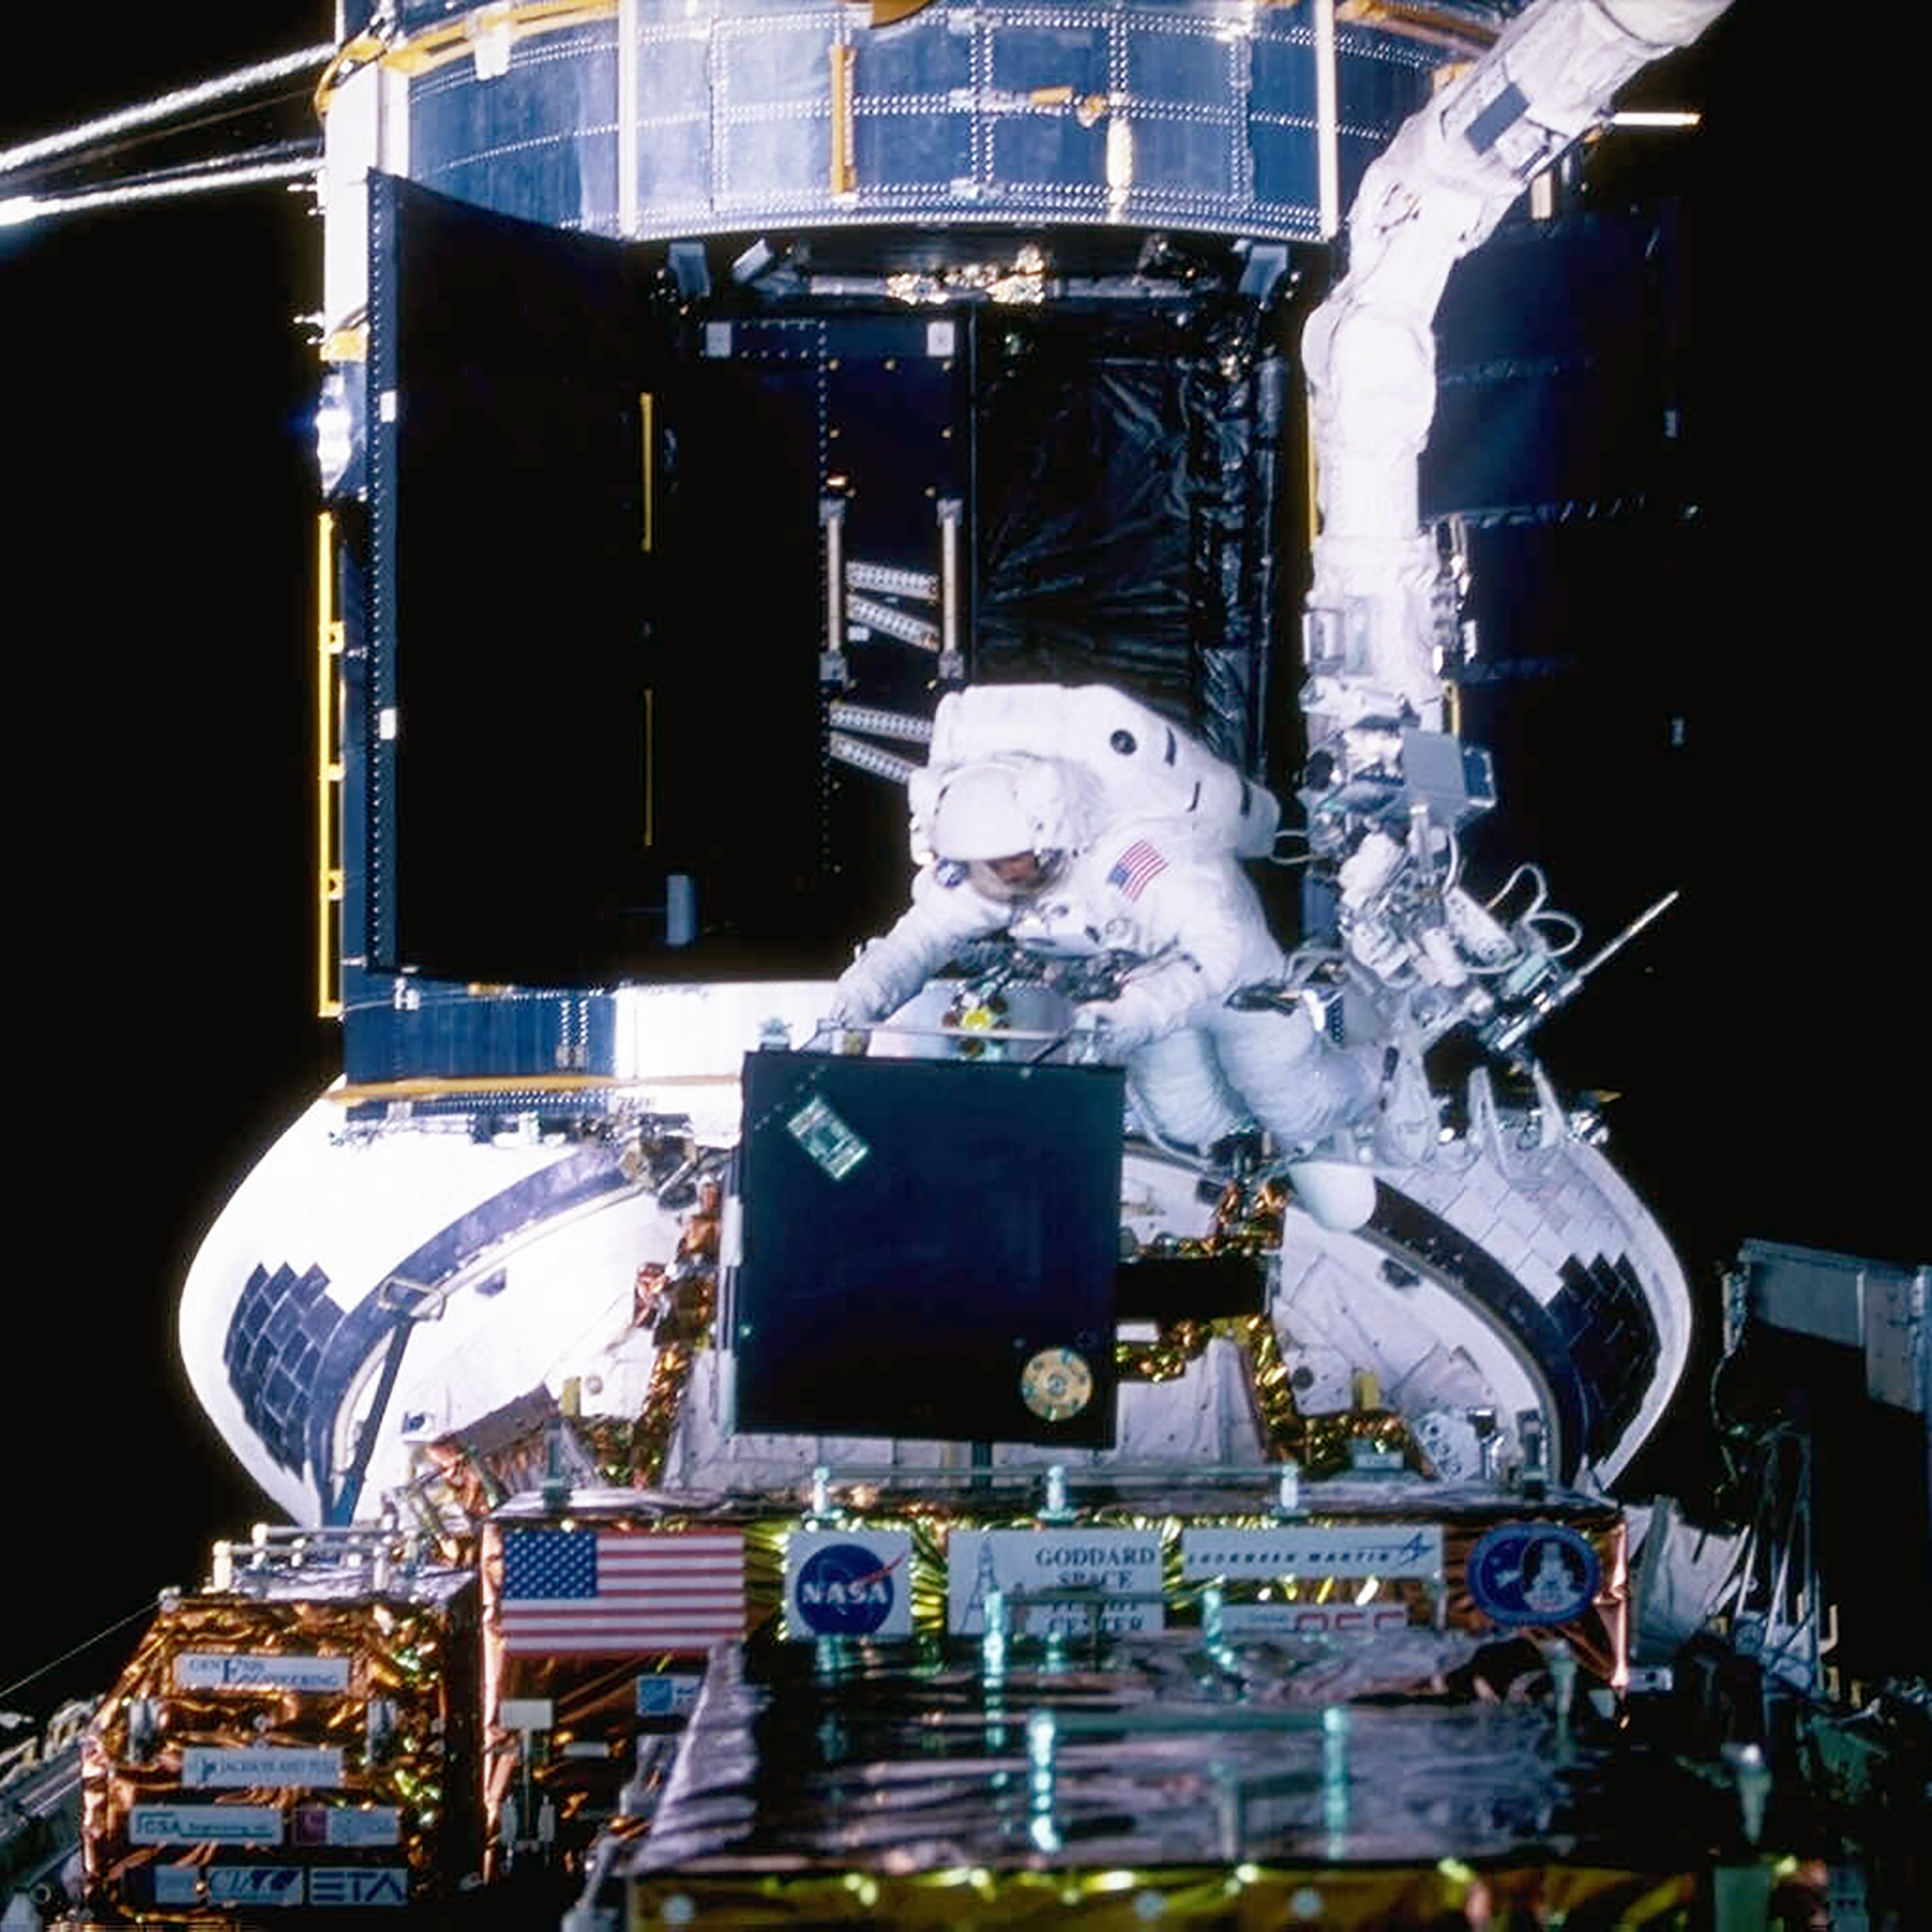 Astronaut in a white space suit on EVA in space removing a black box from the shuttle bay.